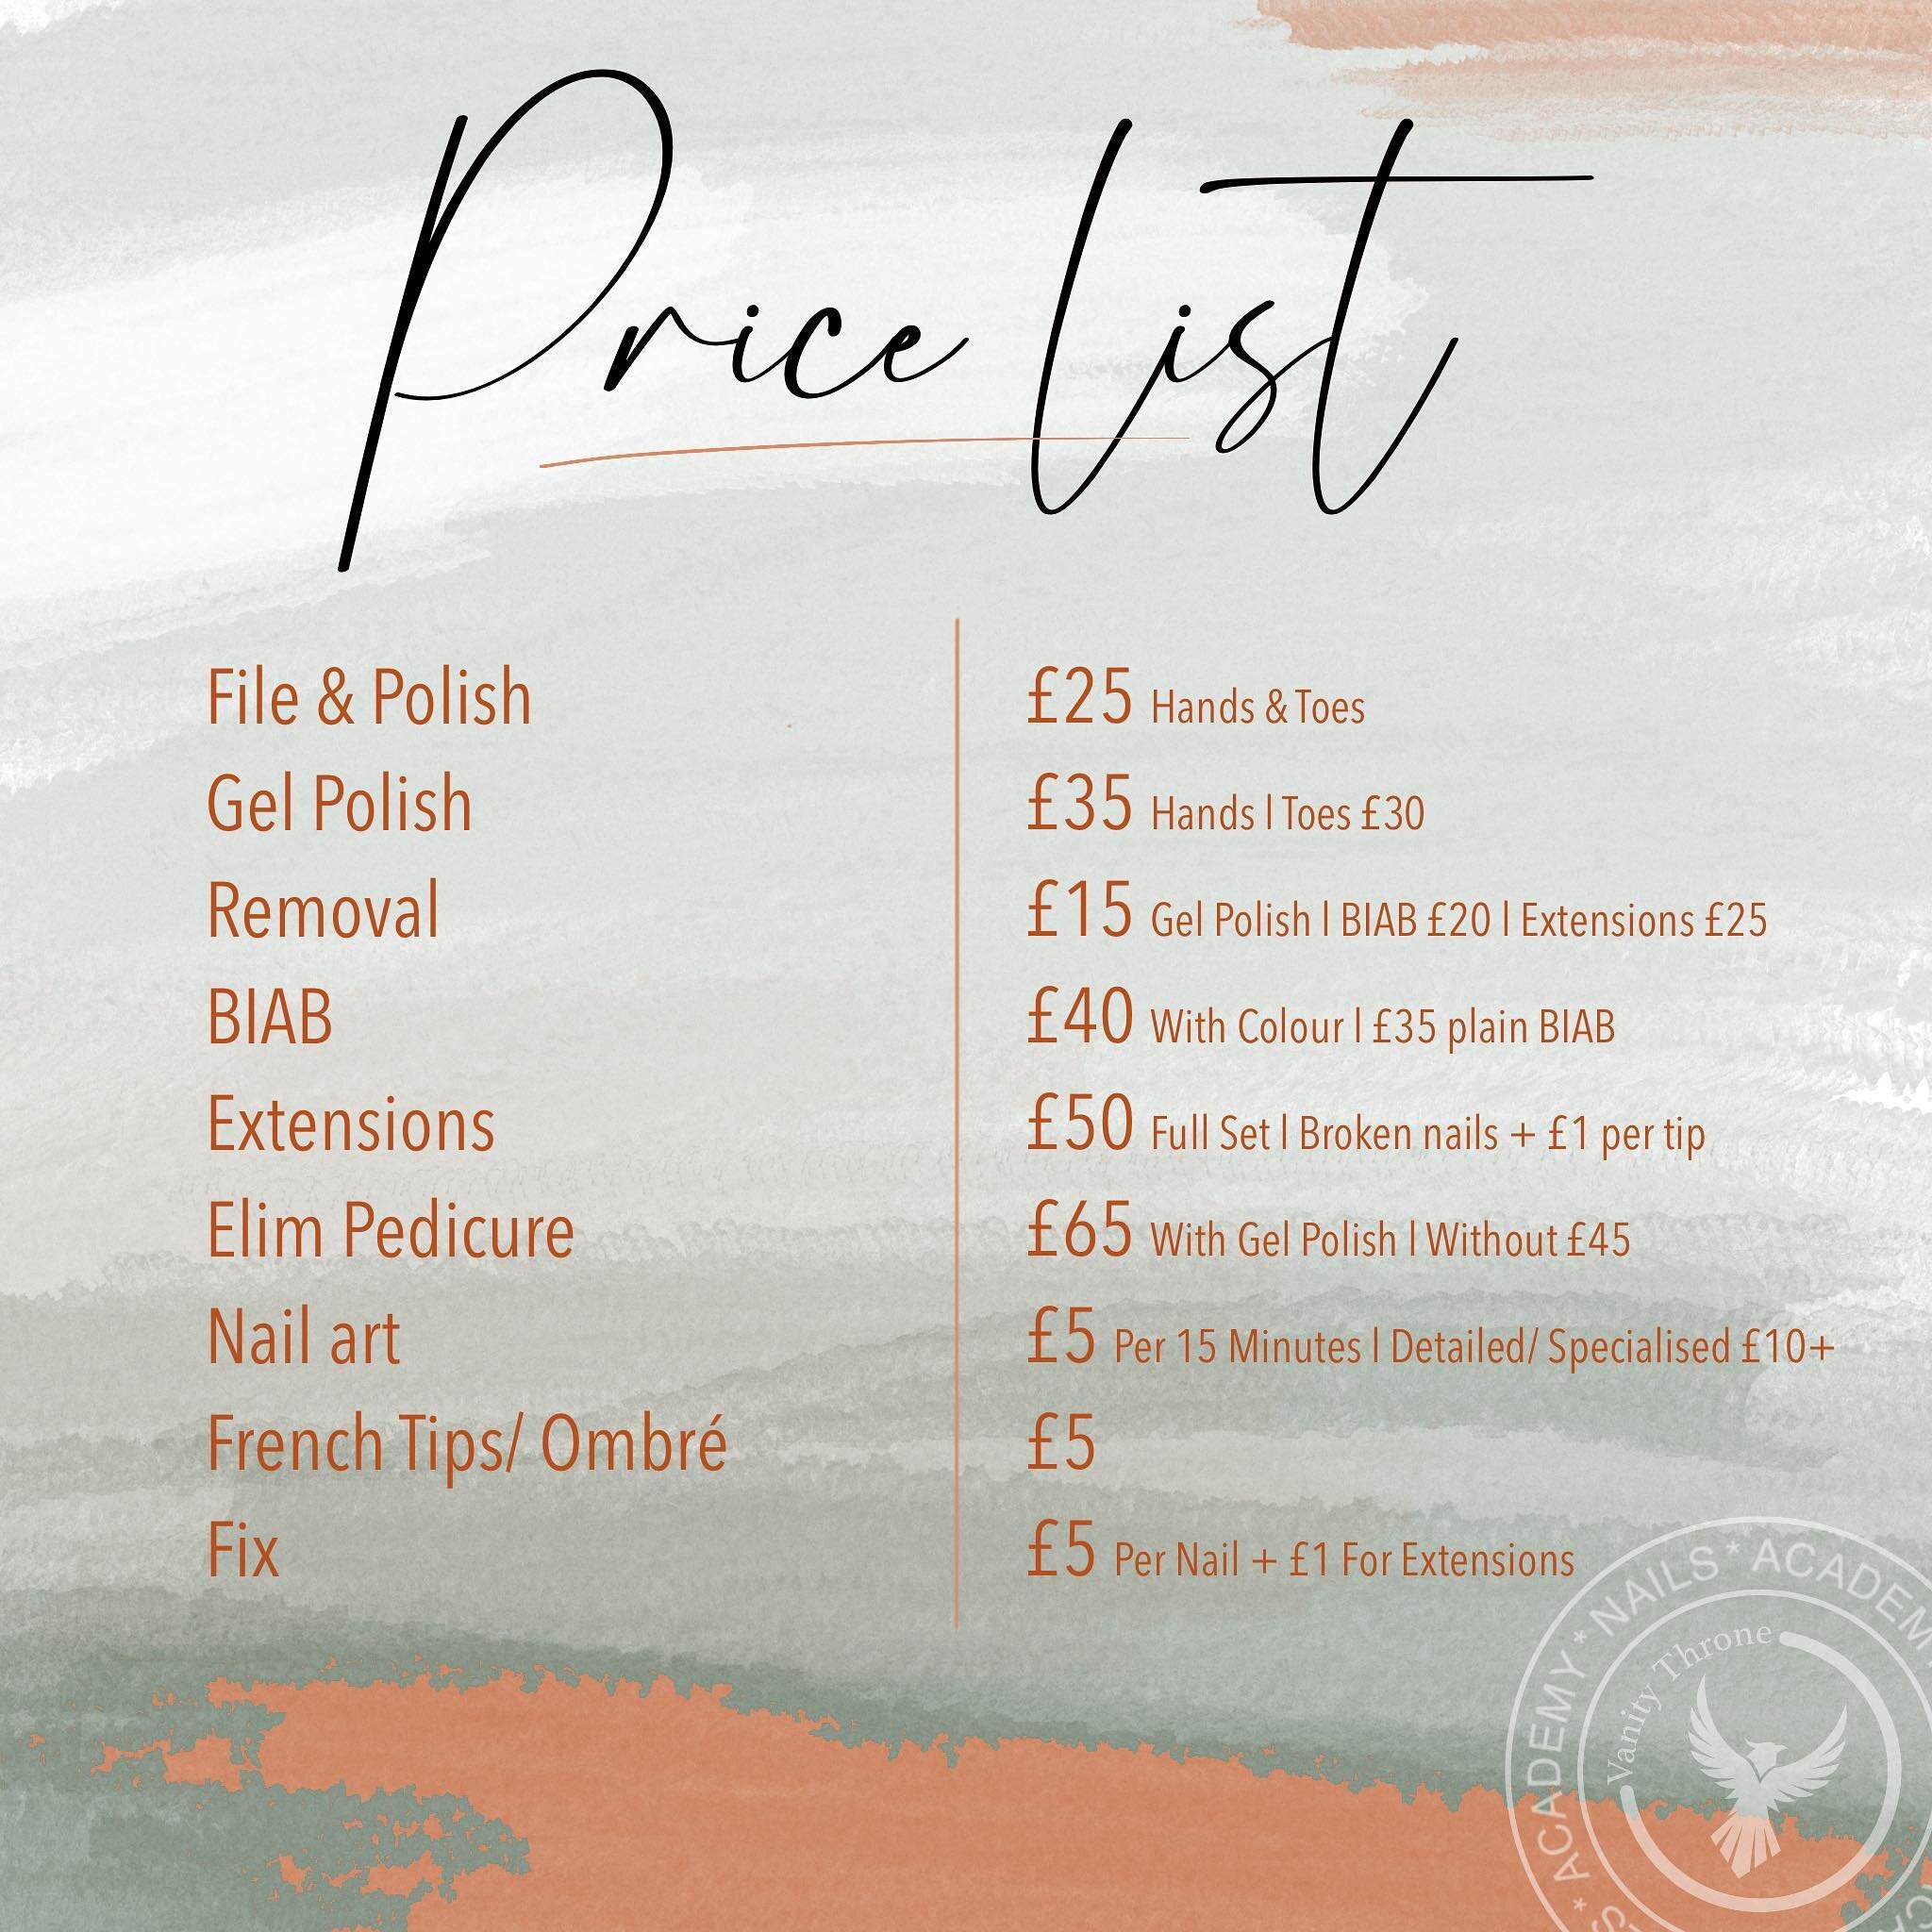 ✨ Revised Price List ✨ 

Effective April 8th 

Please take some time to review our new revised price list and decision as to why we have had to update this (in our previous post). 

I am grateful that you continue to choose me to be your nail tech, a